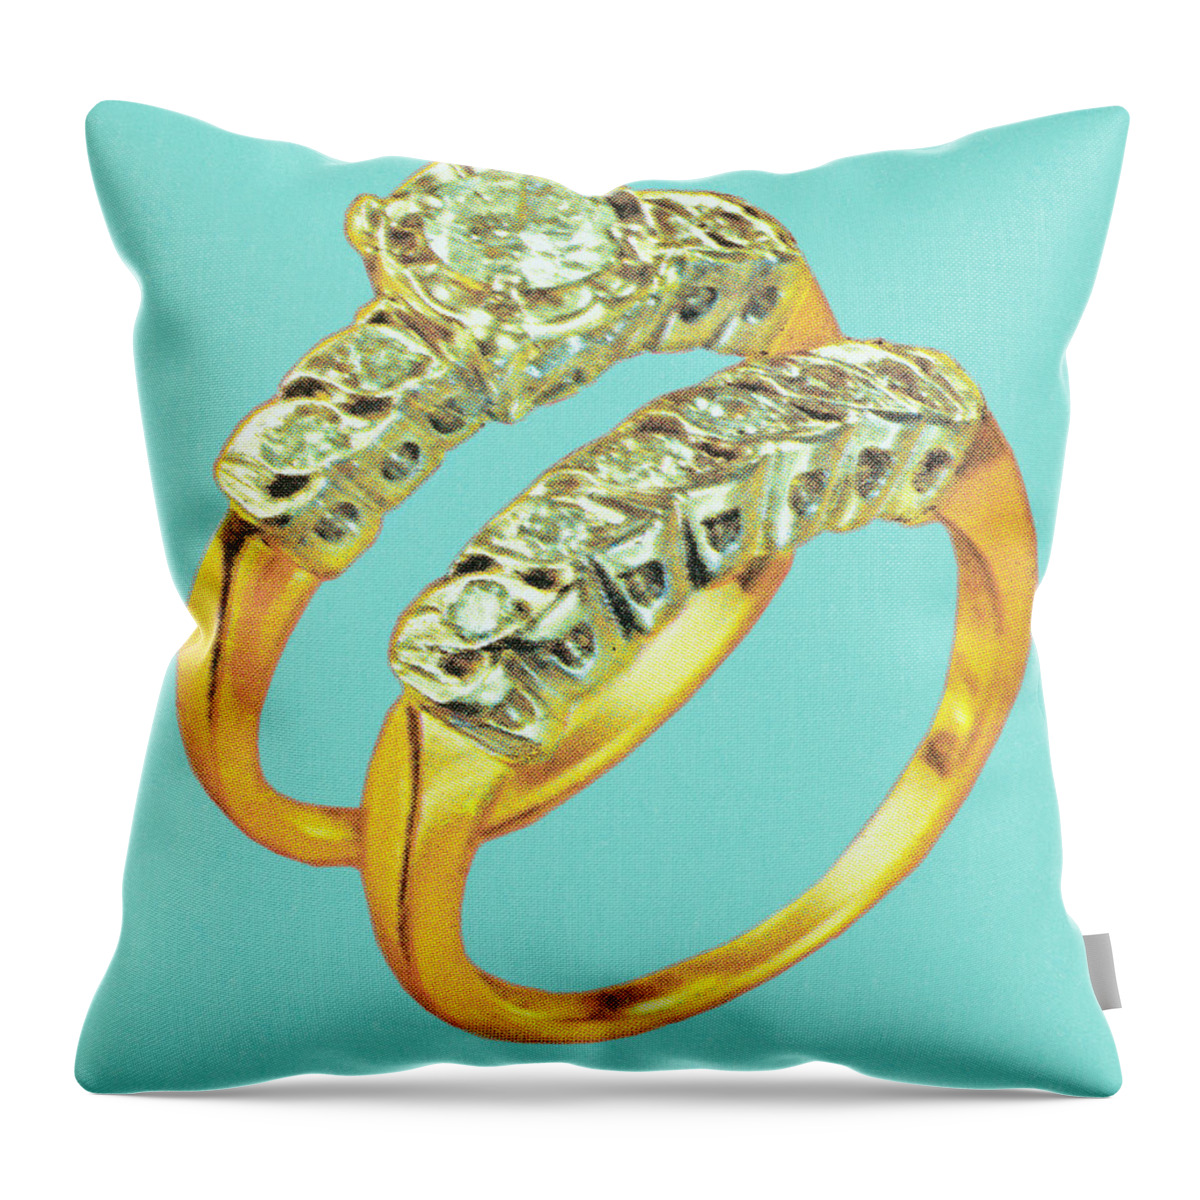 Accessories Throw Pillow featuring the drawing Diamond rings by CSA Images